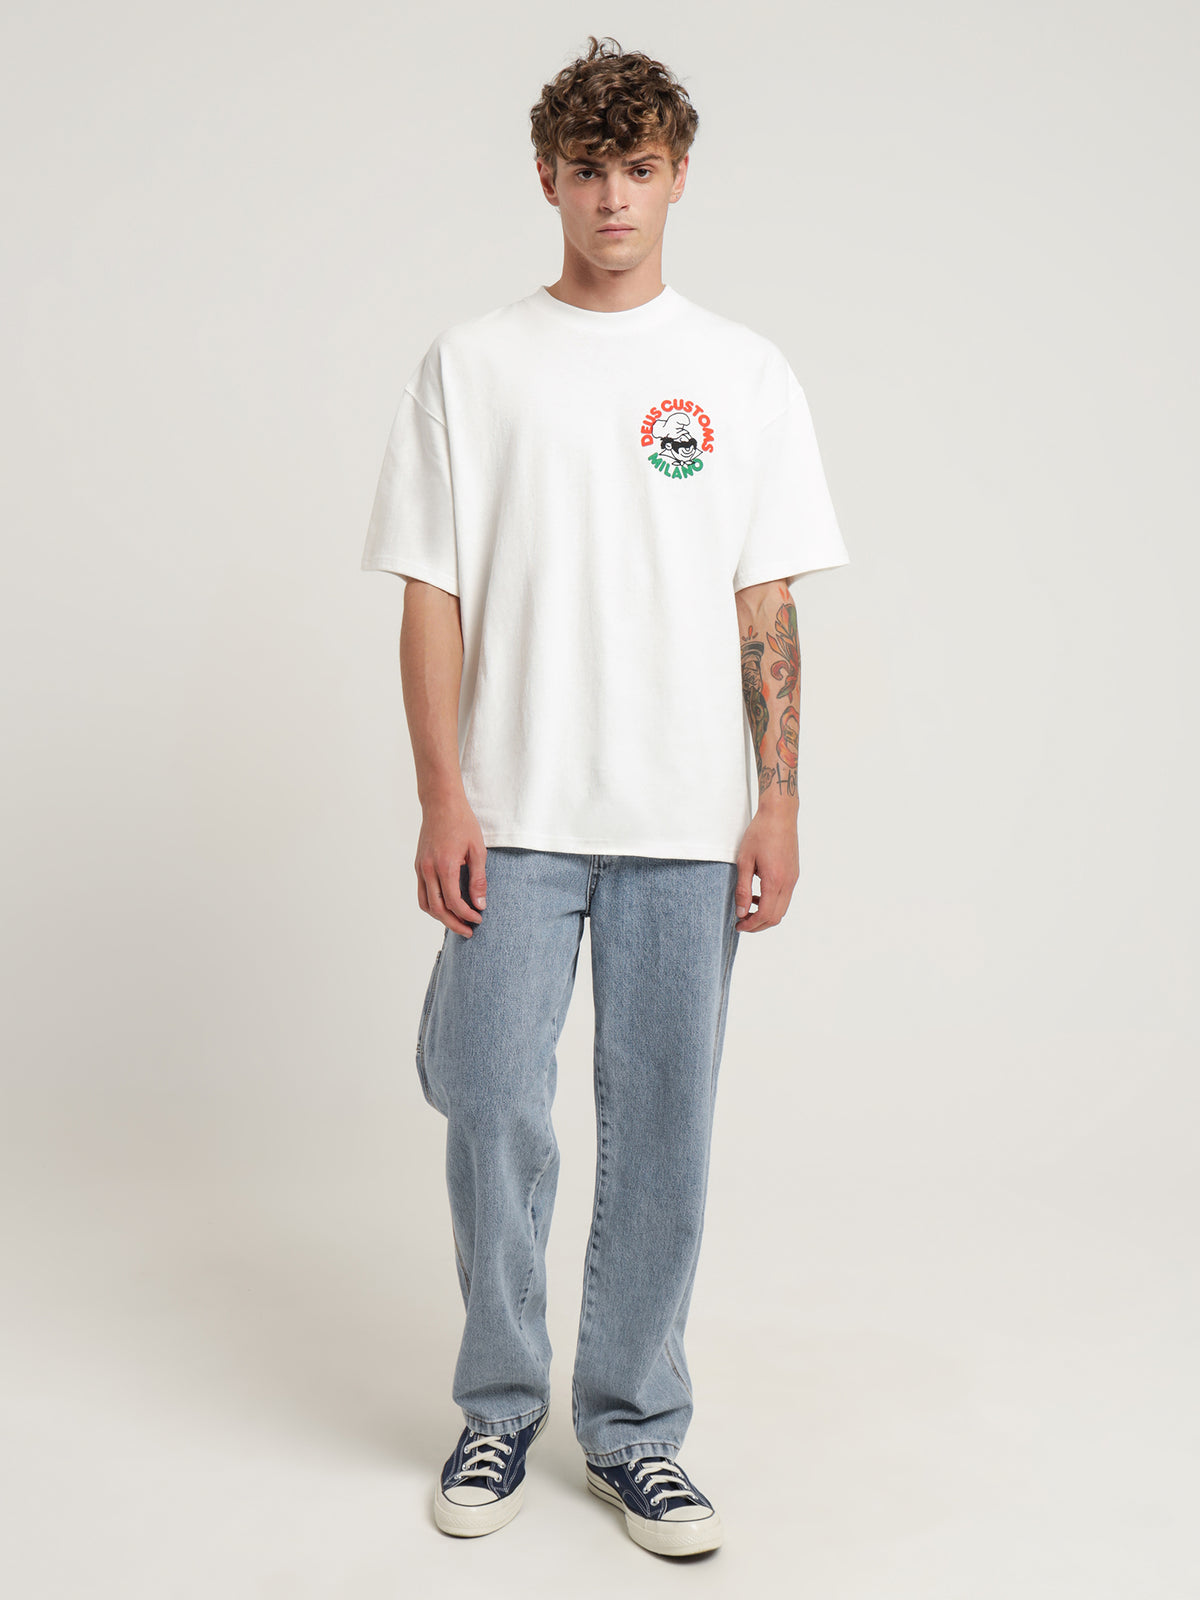 Hot Step T-Shirt in White